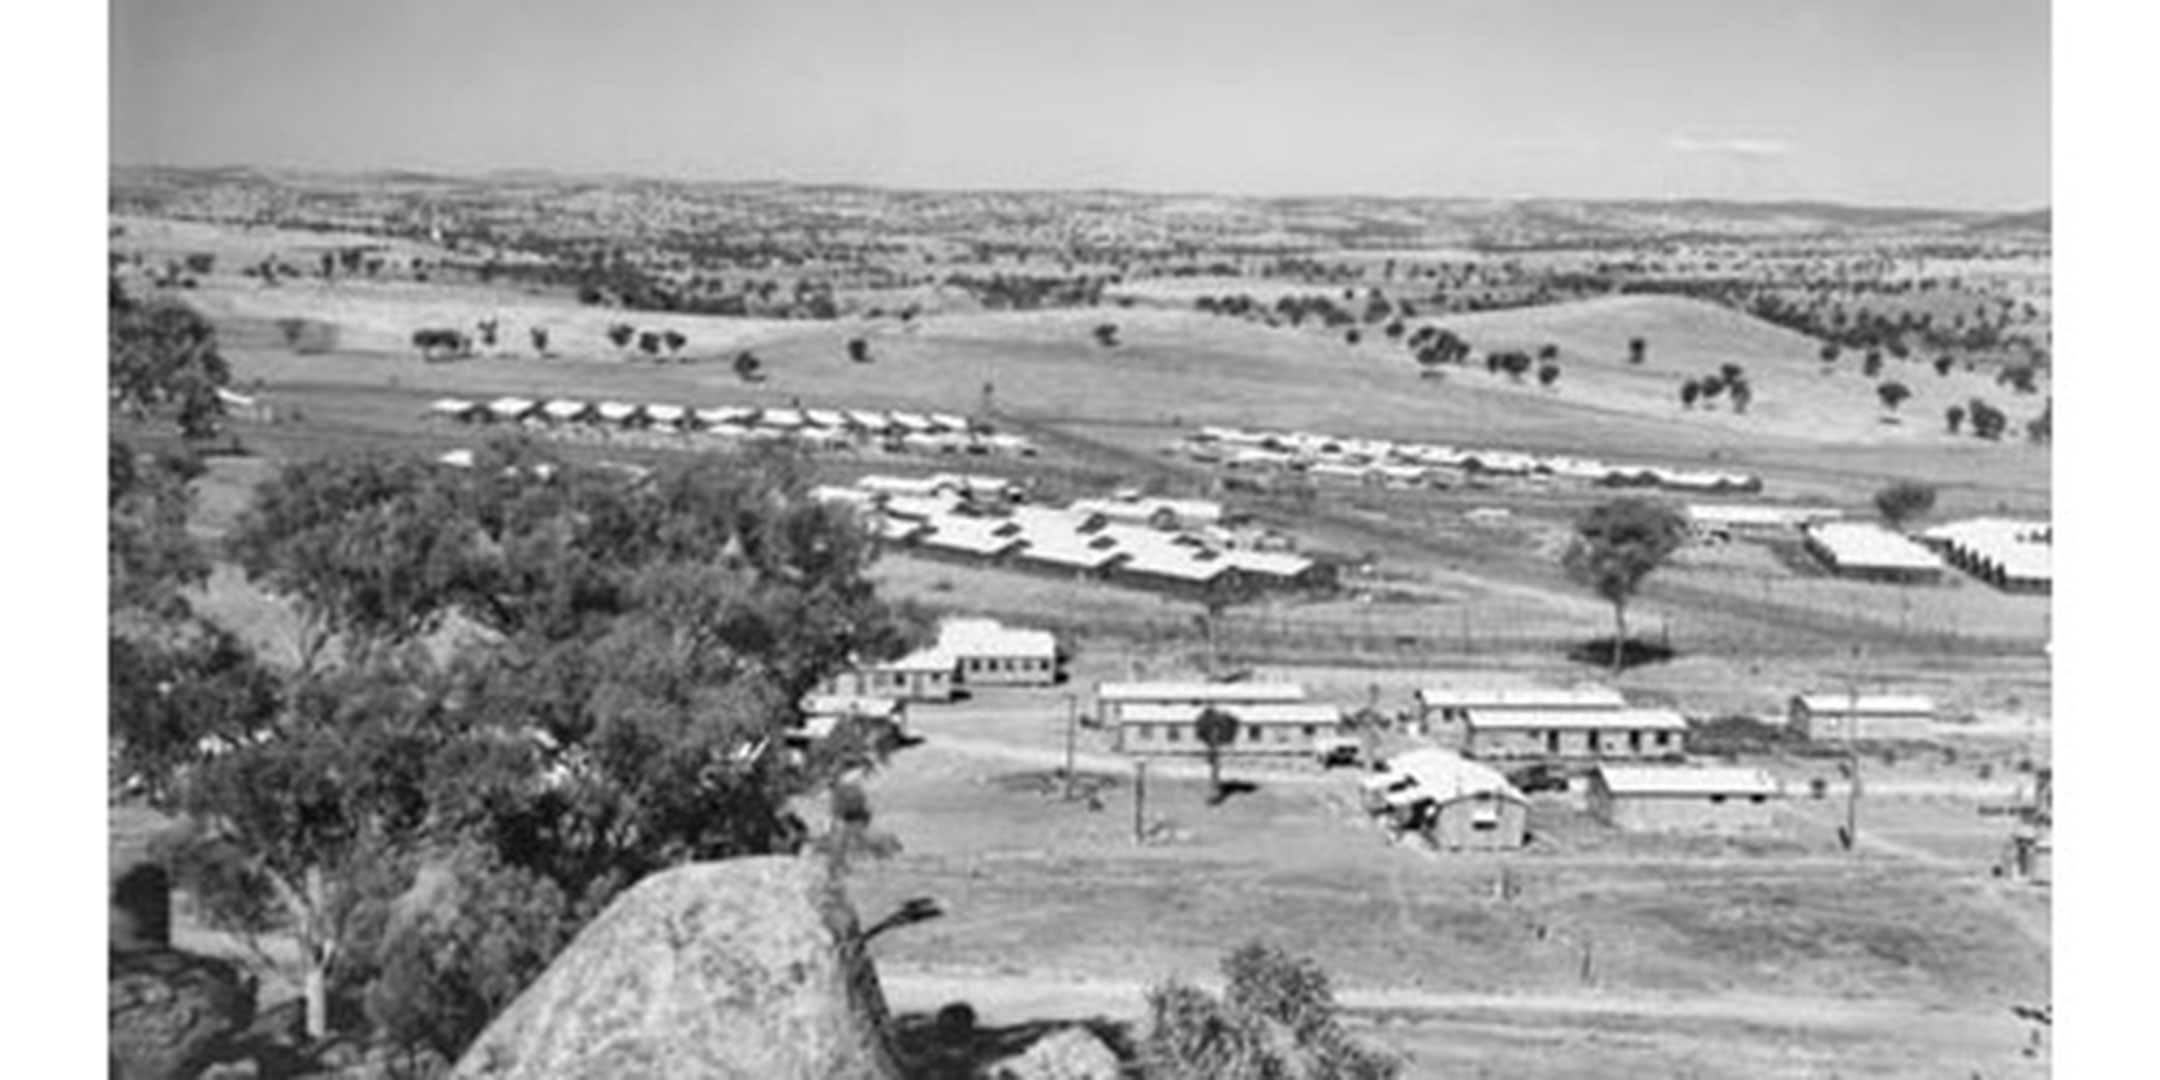 The prisoner of war camp at Cowra, 1944 (AWM 064284) Retrieved From: http://www.naa.gov.au/collection/snapshots/internment-camps/WWII/cowra.aspx